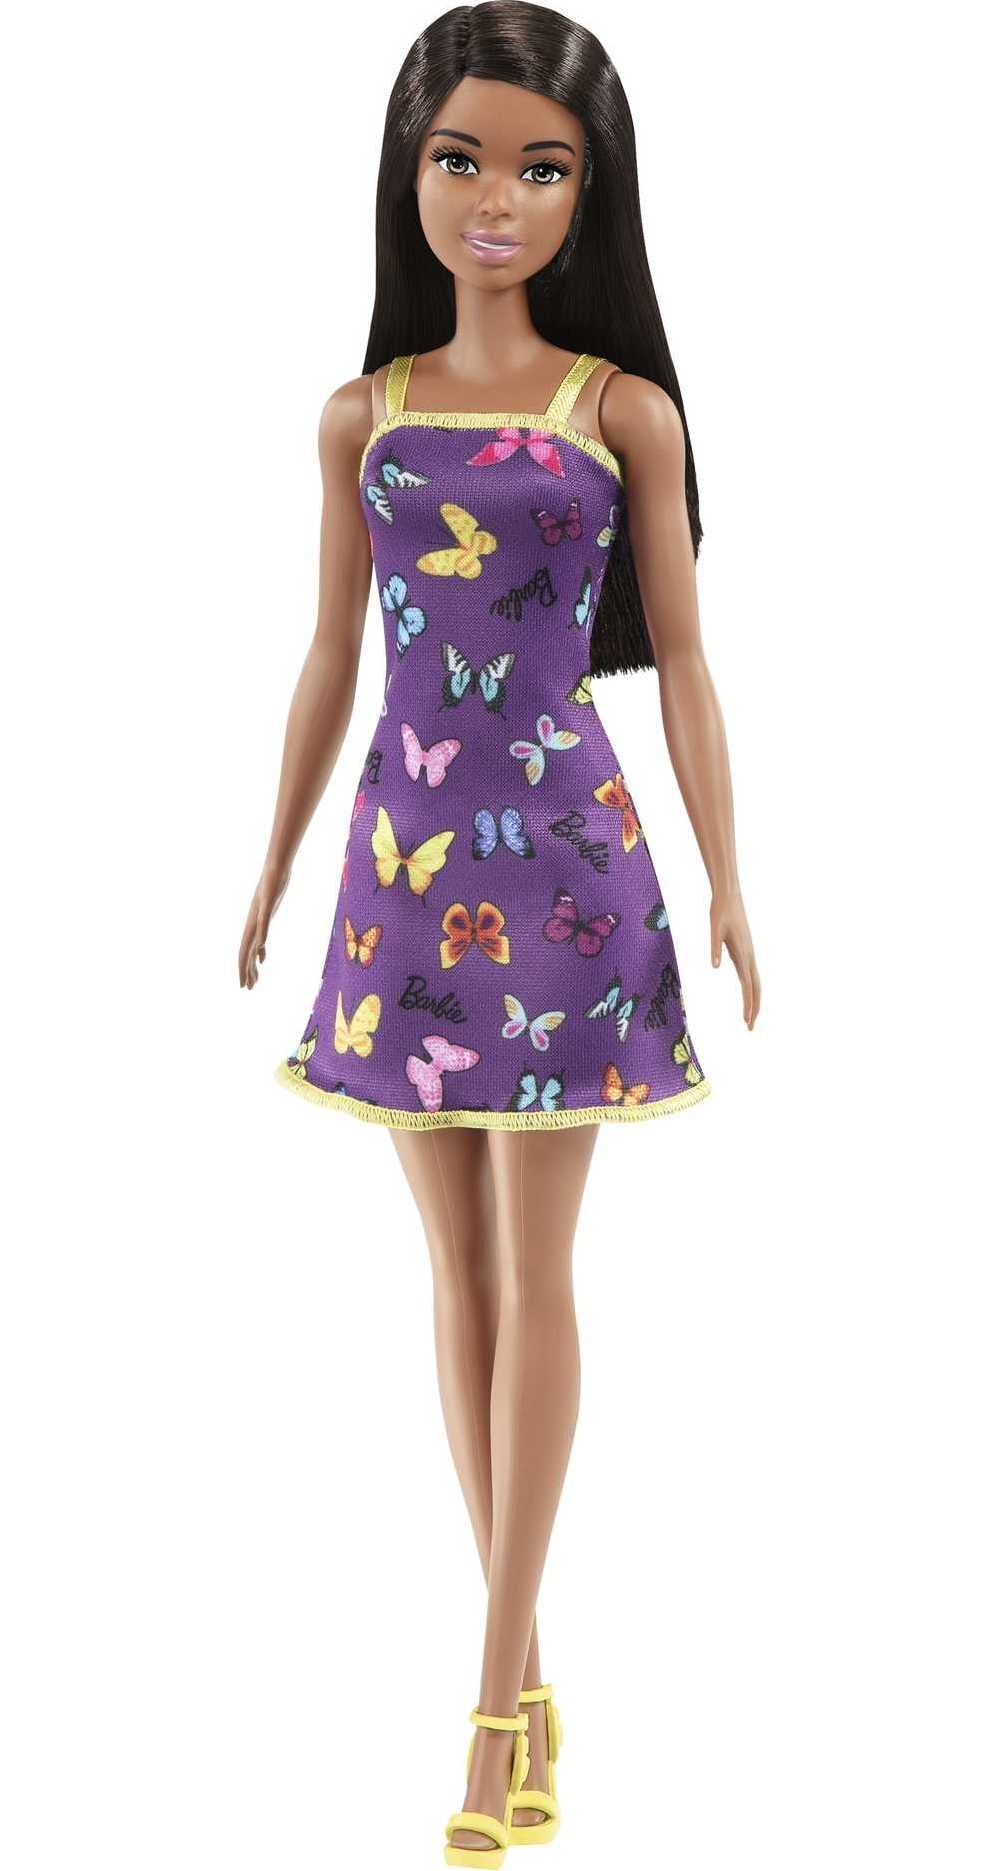 Barbie Doll with Colorful Butterfly and Barbie Logo Print Dress & Strappy Heels